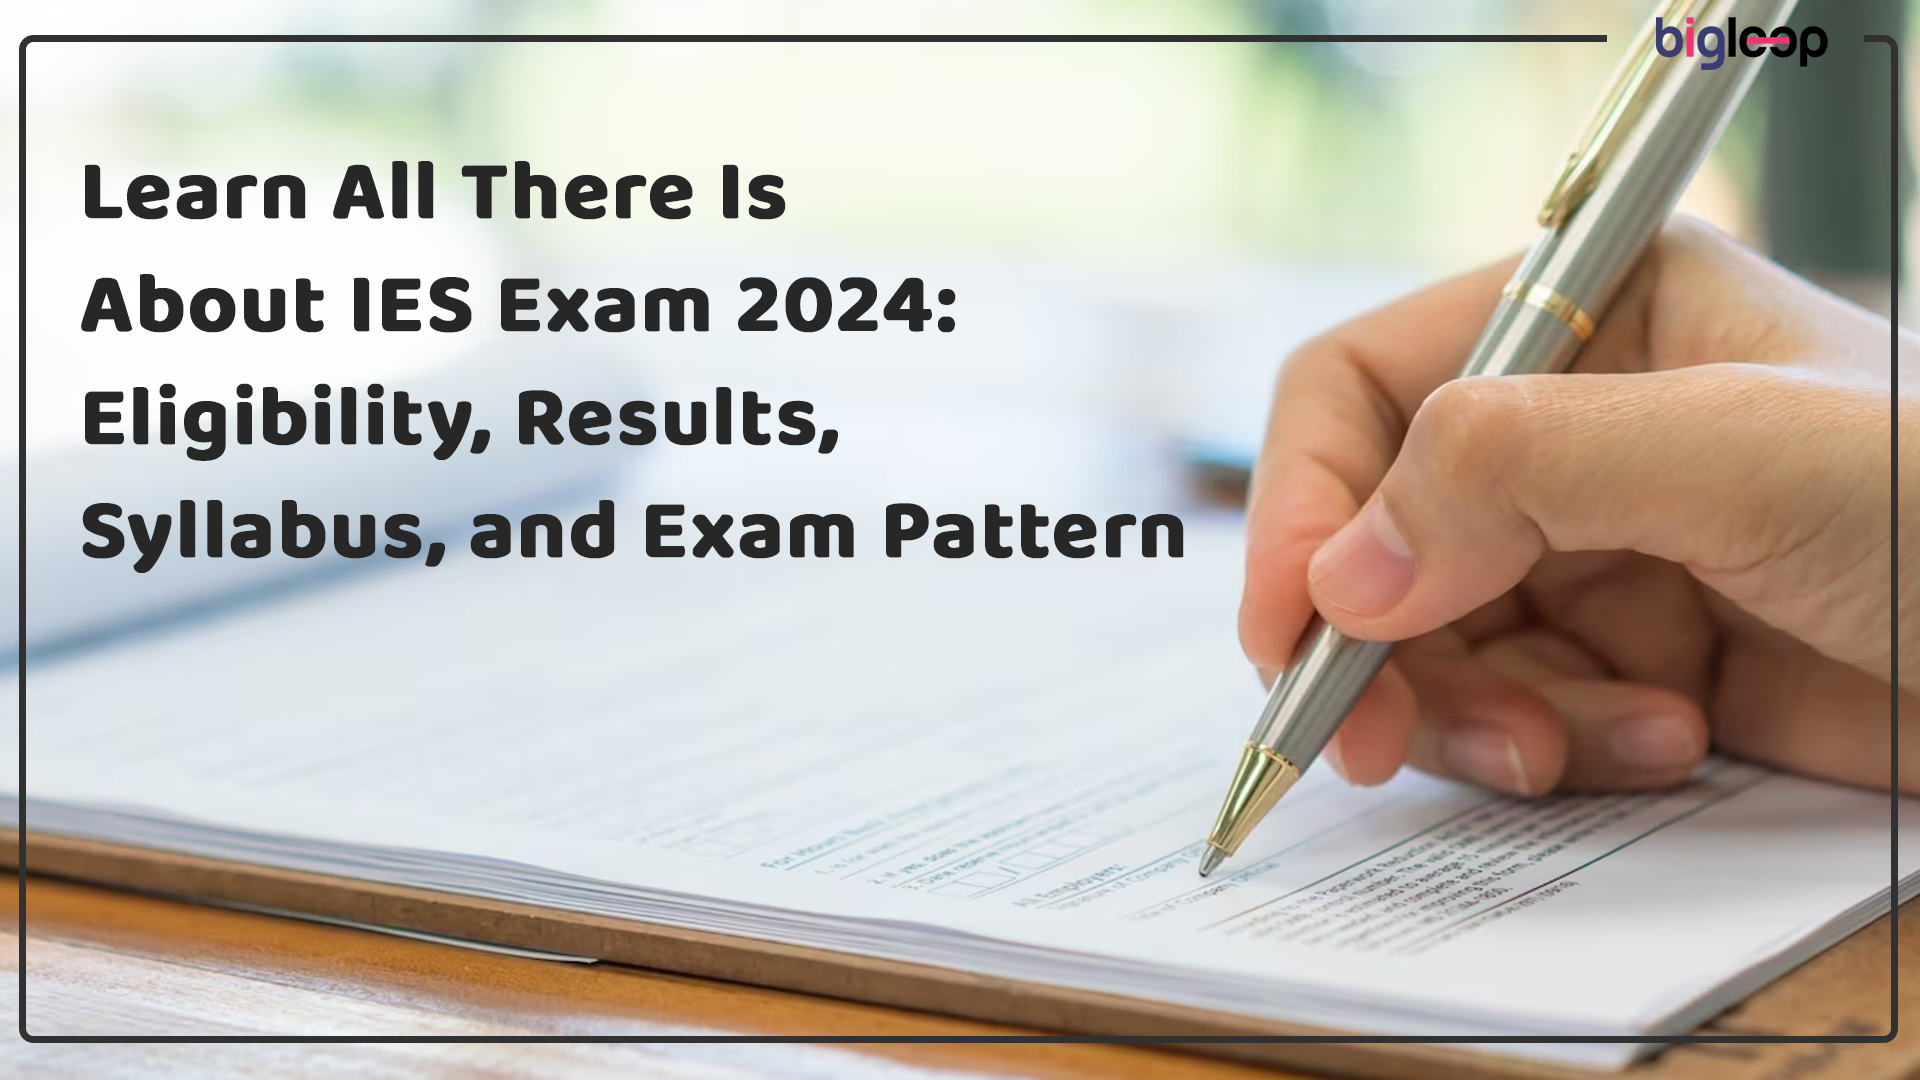 Learn All There Is About IES Exam 2024: Eligibility, Results, Syllabus, and Exam Pattern